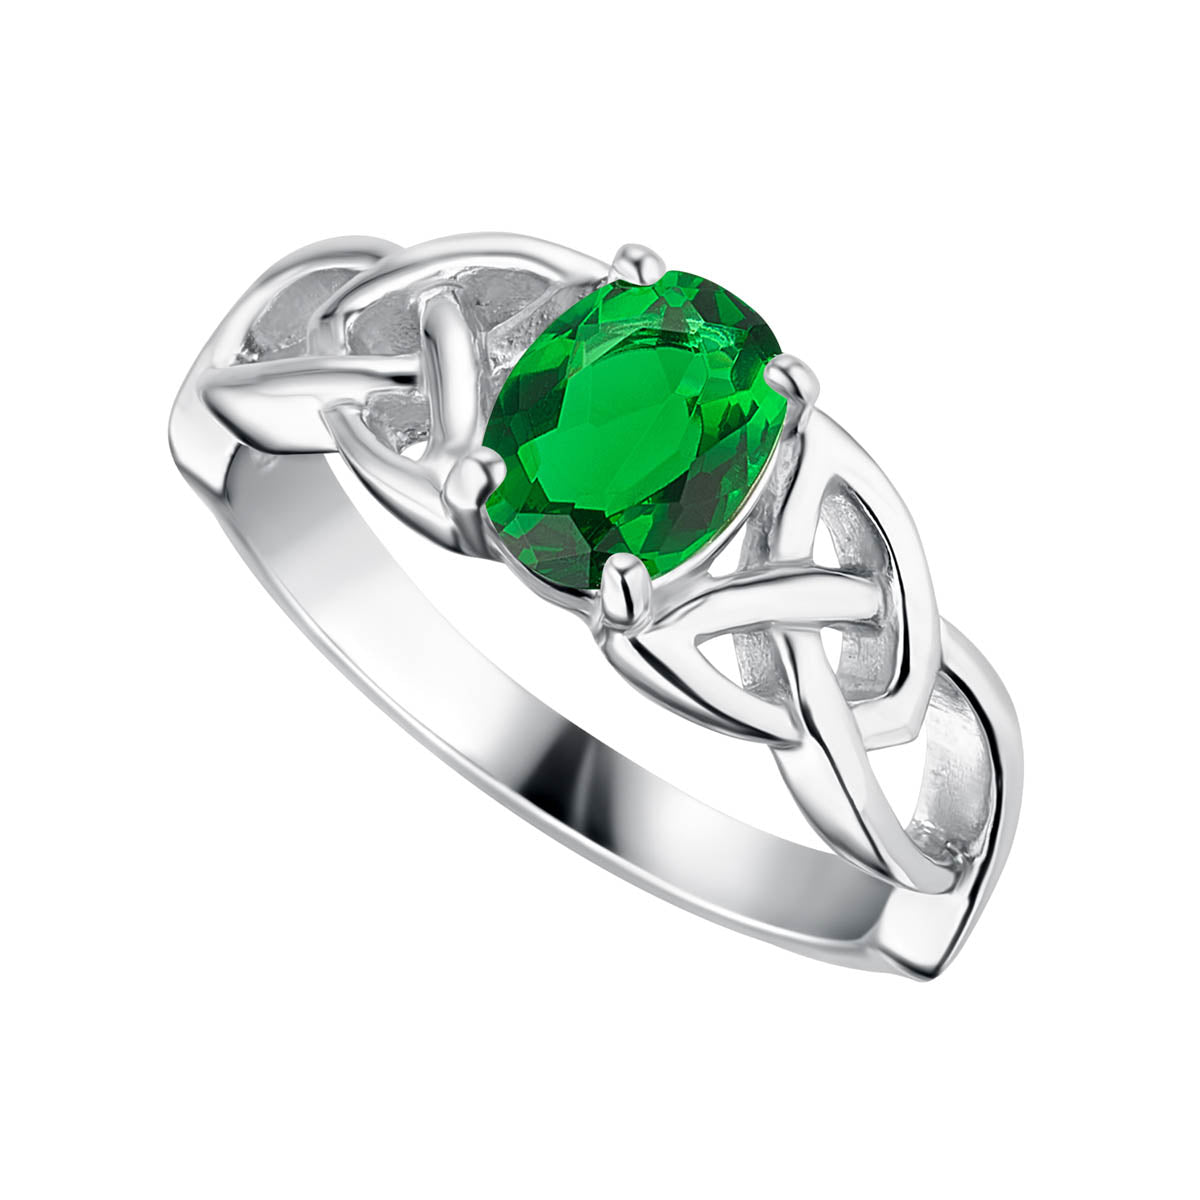 Stock image of Solvar Sterling Silver Green Crystal Trinity Knot Ring S21141